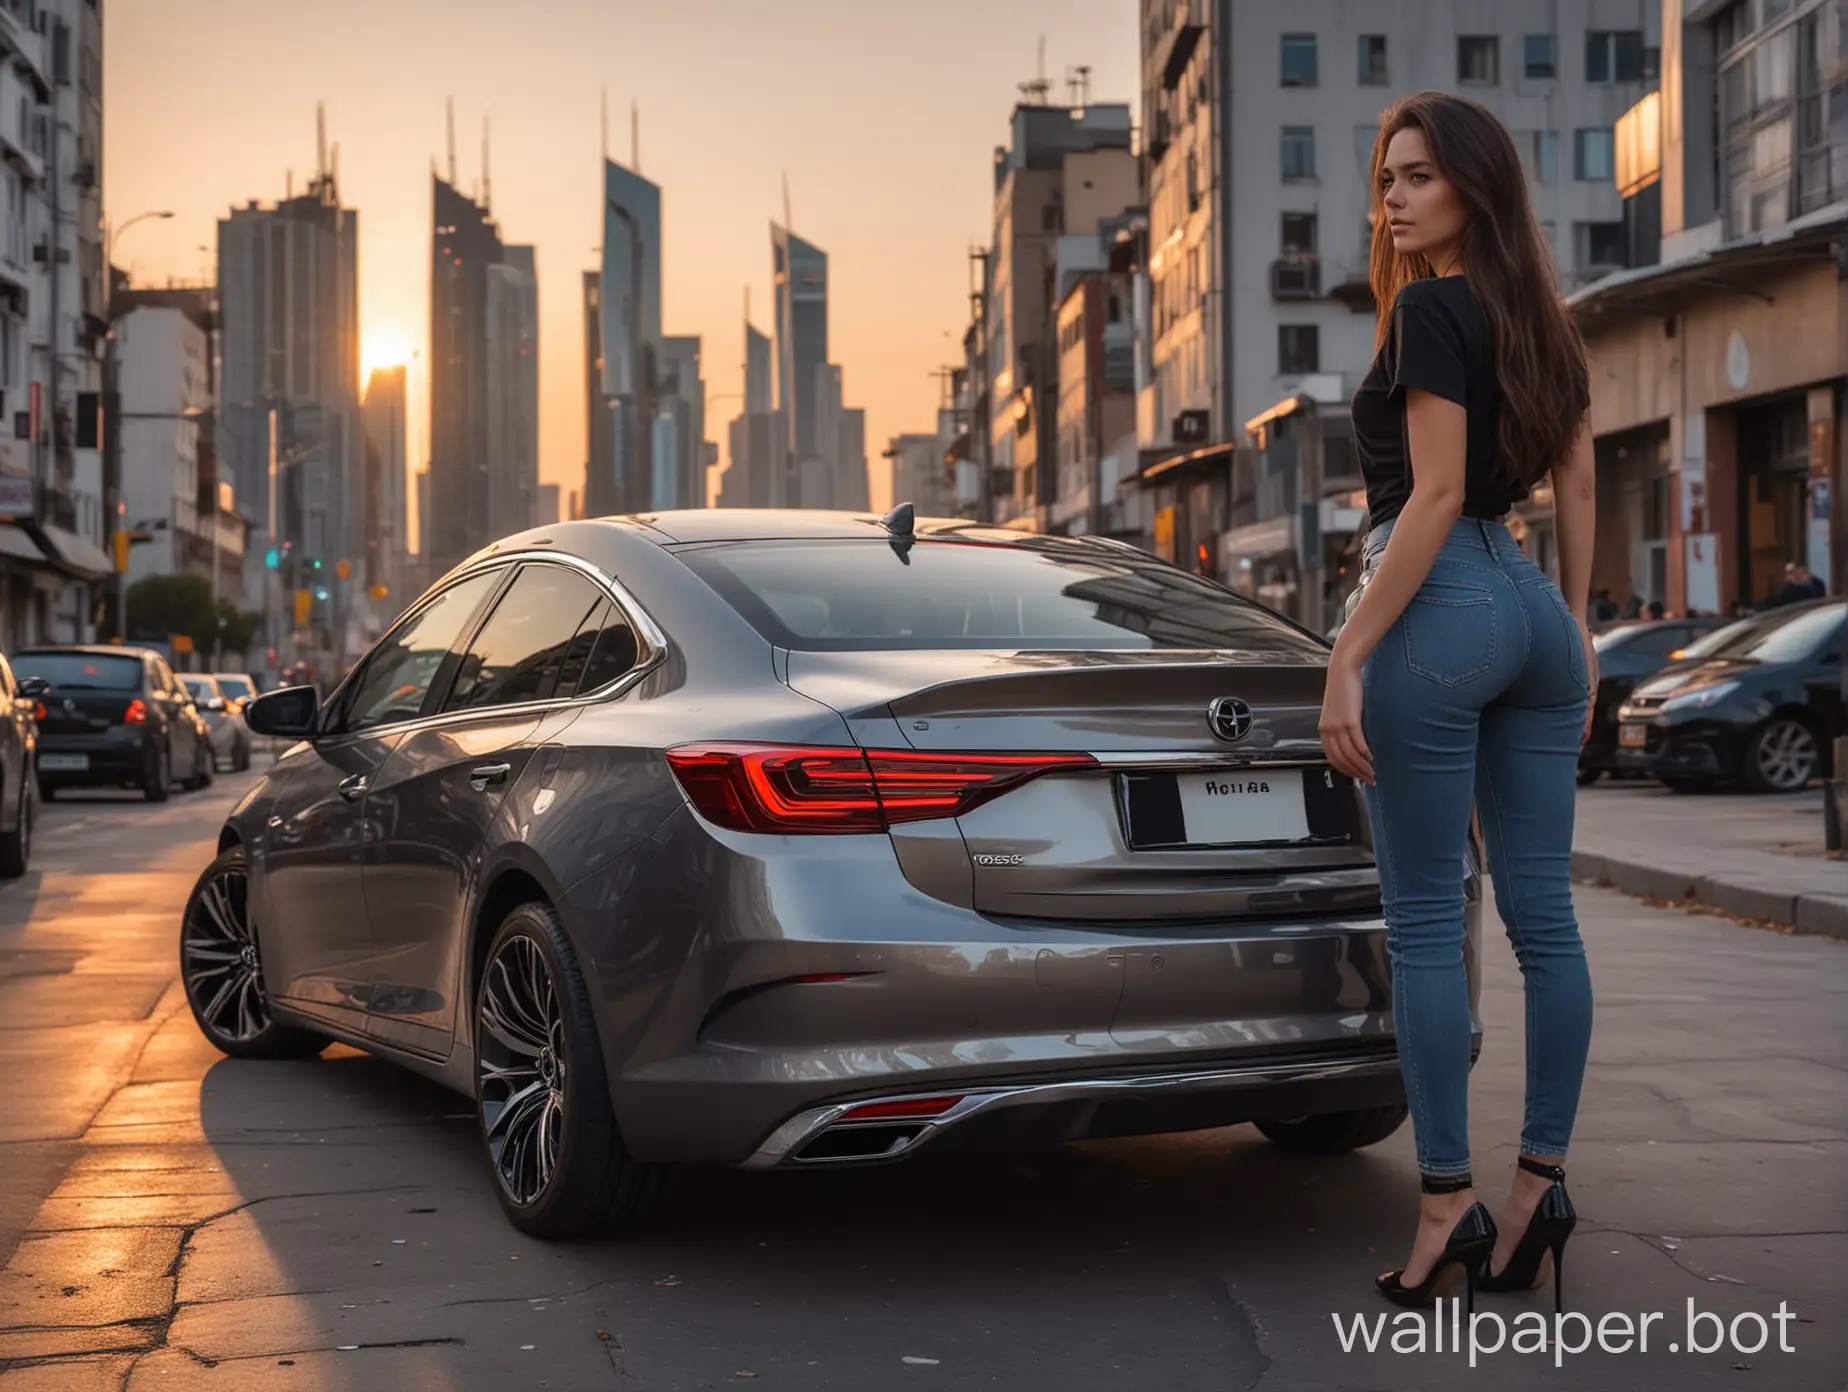 Darkhaired-Woman-in-Black-TShirt-by-Grey-Opel-Insignia-GrandSport-in-Futuristic-Sunset-Cityscape